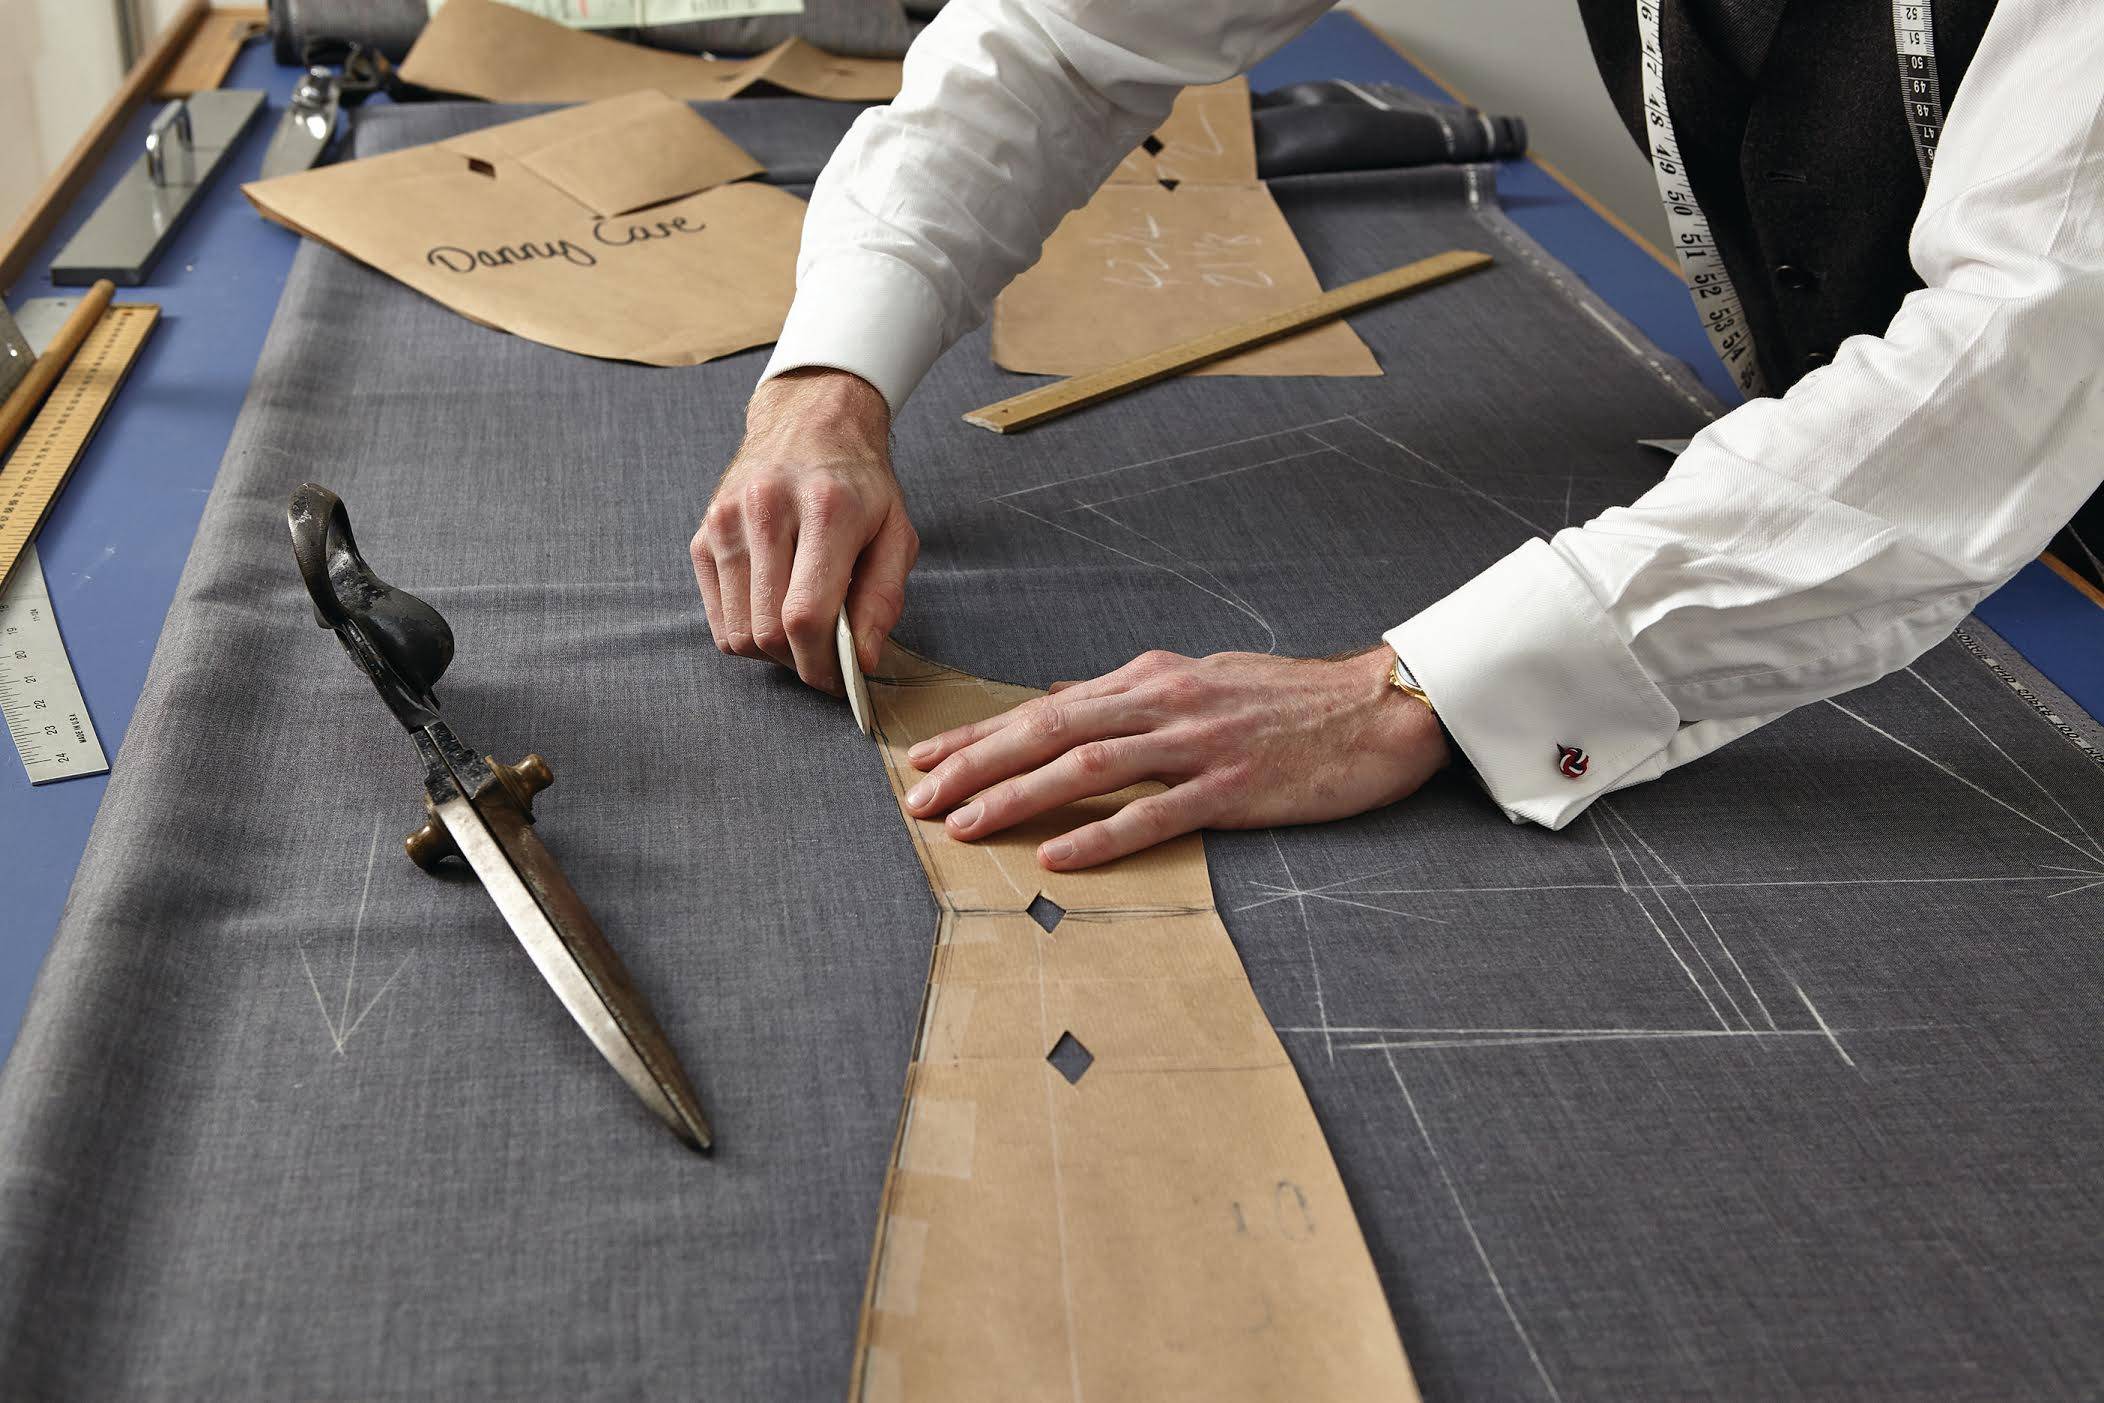 A cutter at work at Stowers London on Savile Row – but are bespoke suits really worth the expense? Photo: Handout